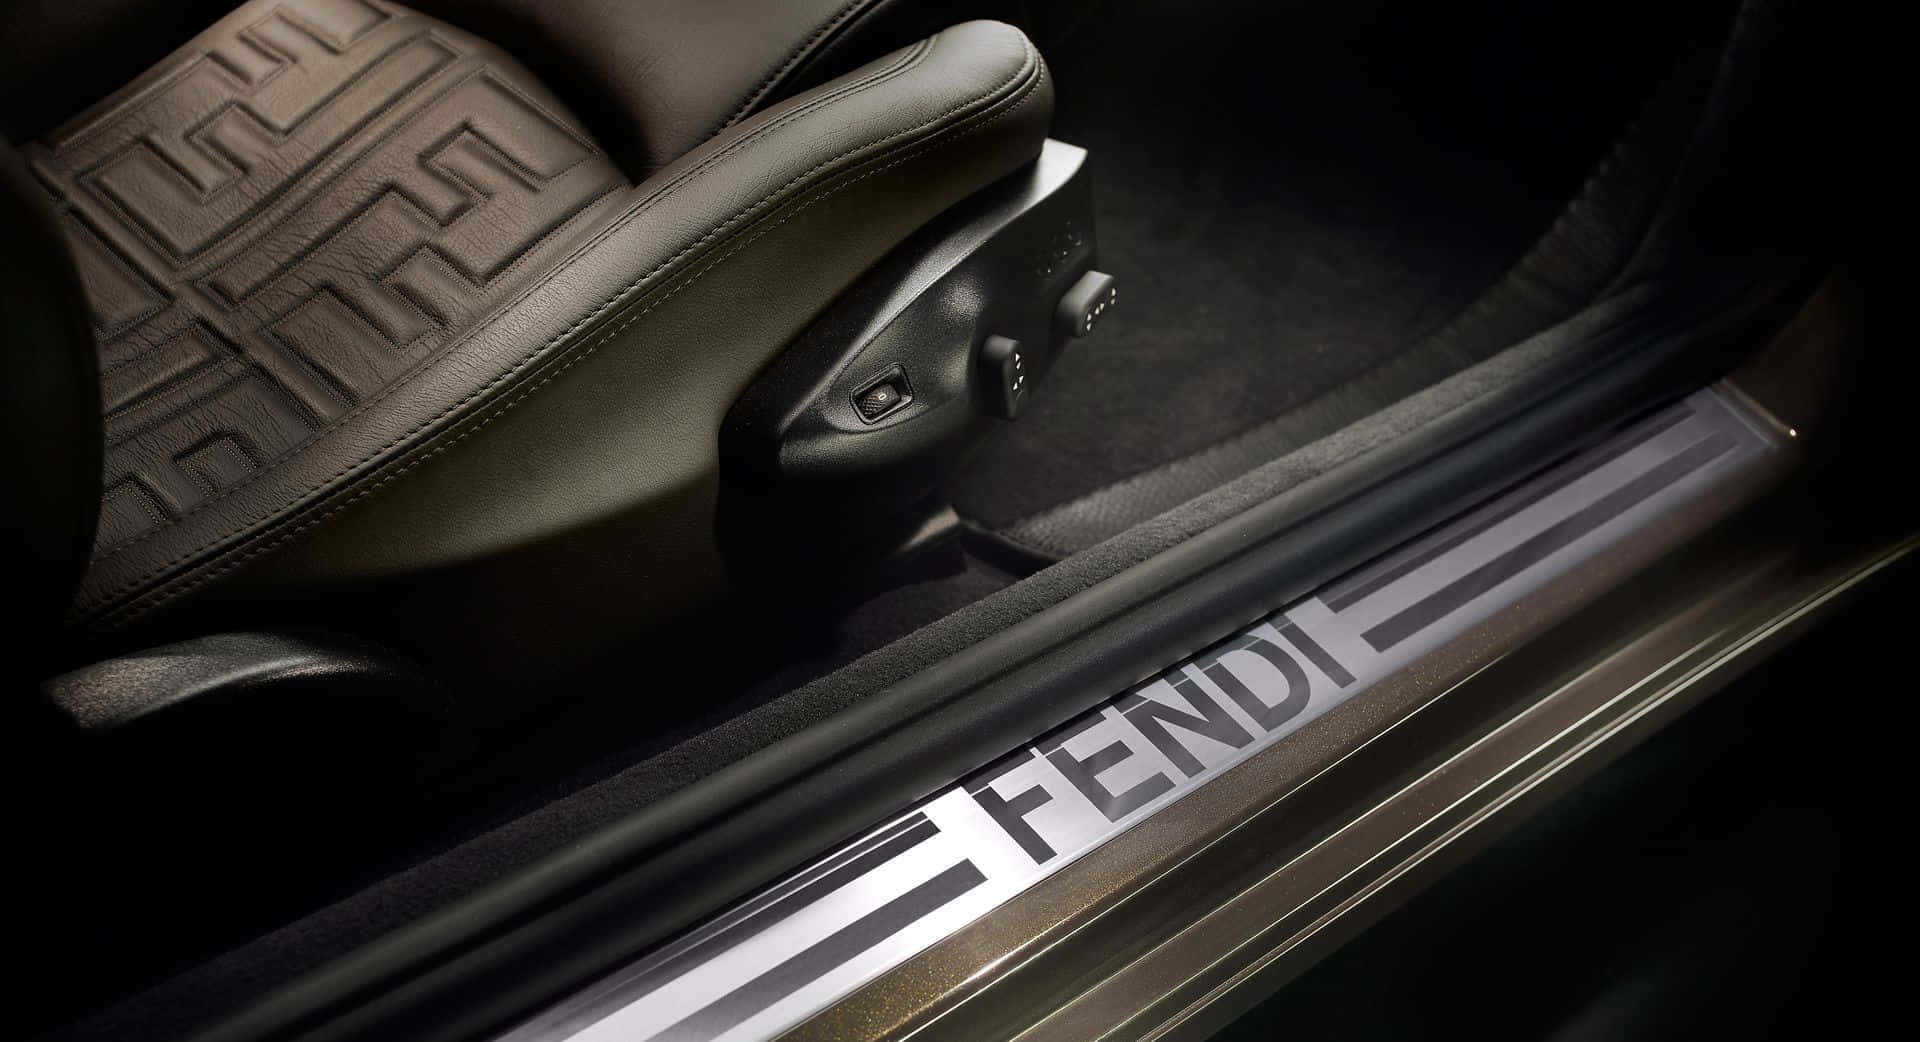 Stand out in style with Fendi